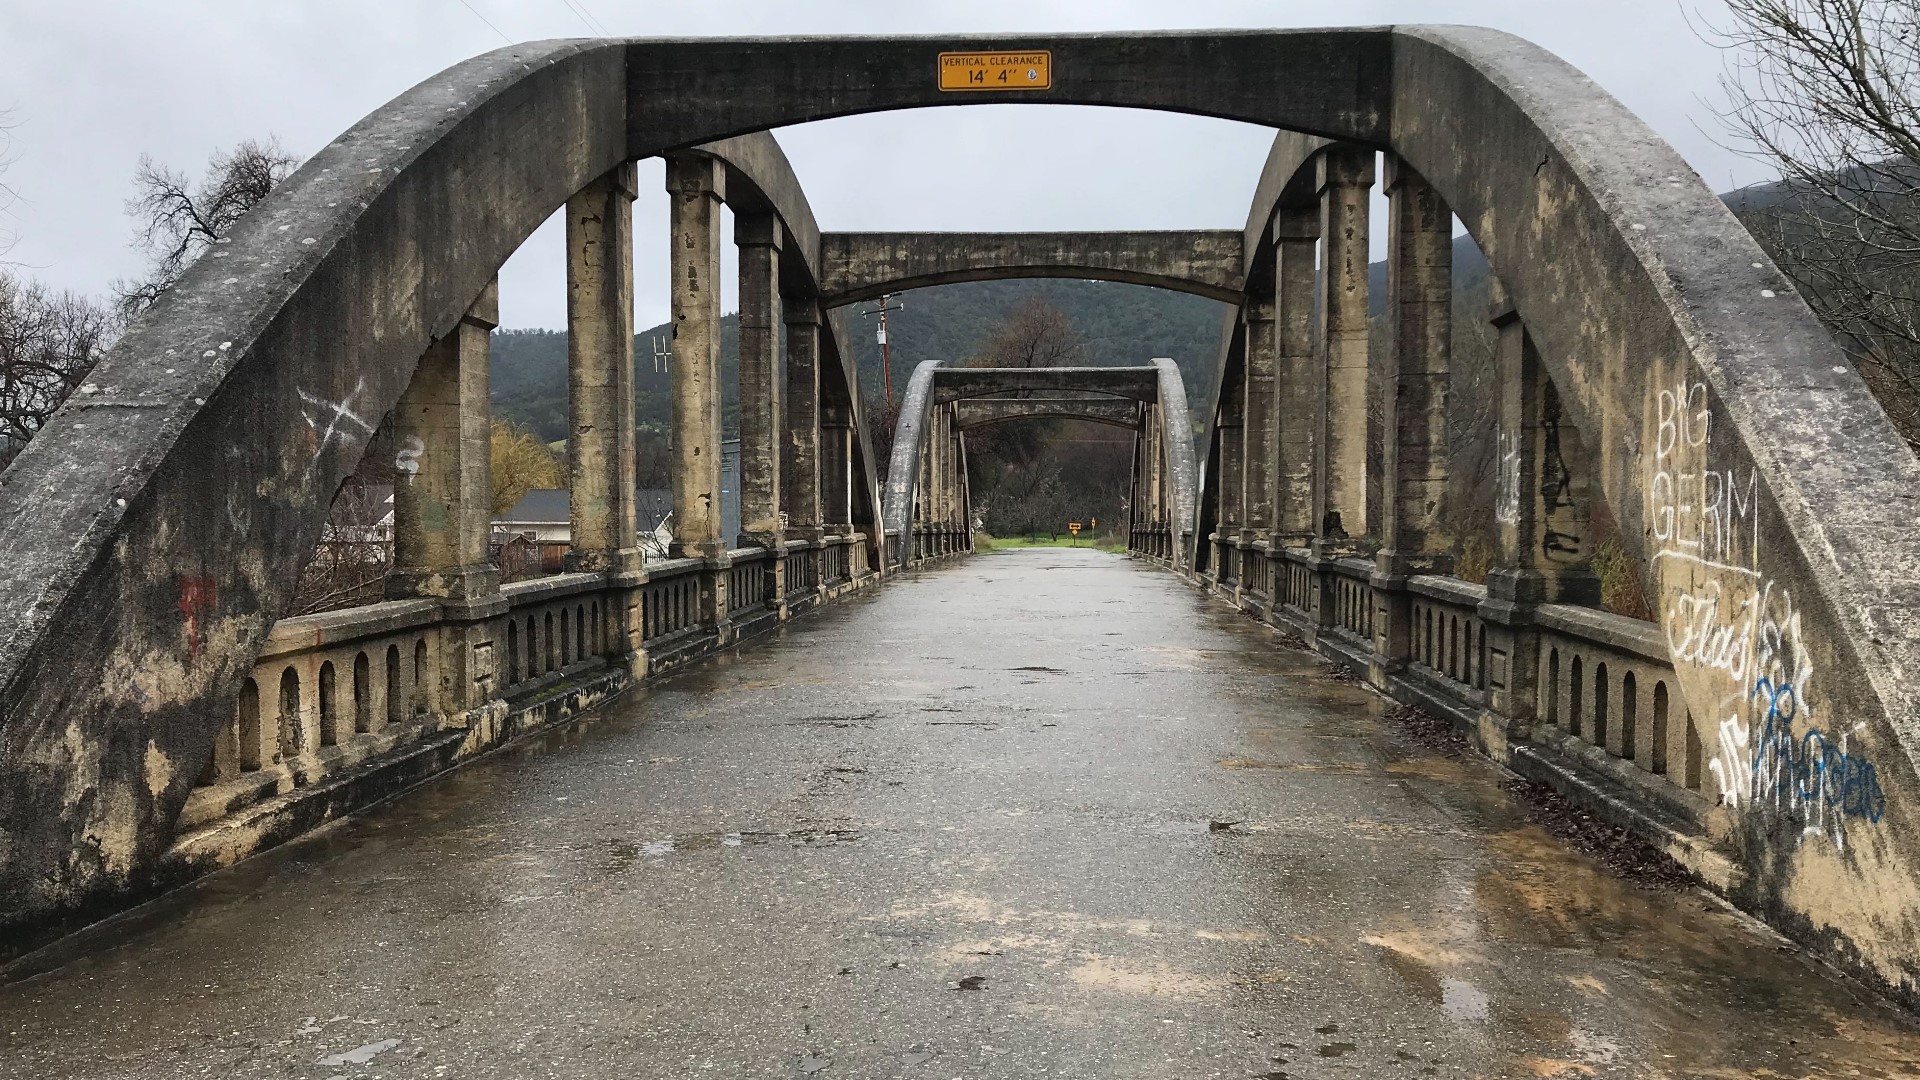 A flood warning has been issued for the Rumsey Bridge in Yolo County. It has left many families concerned because, if the bridge floods, it could leave people stuck in the area for days.